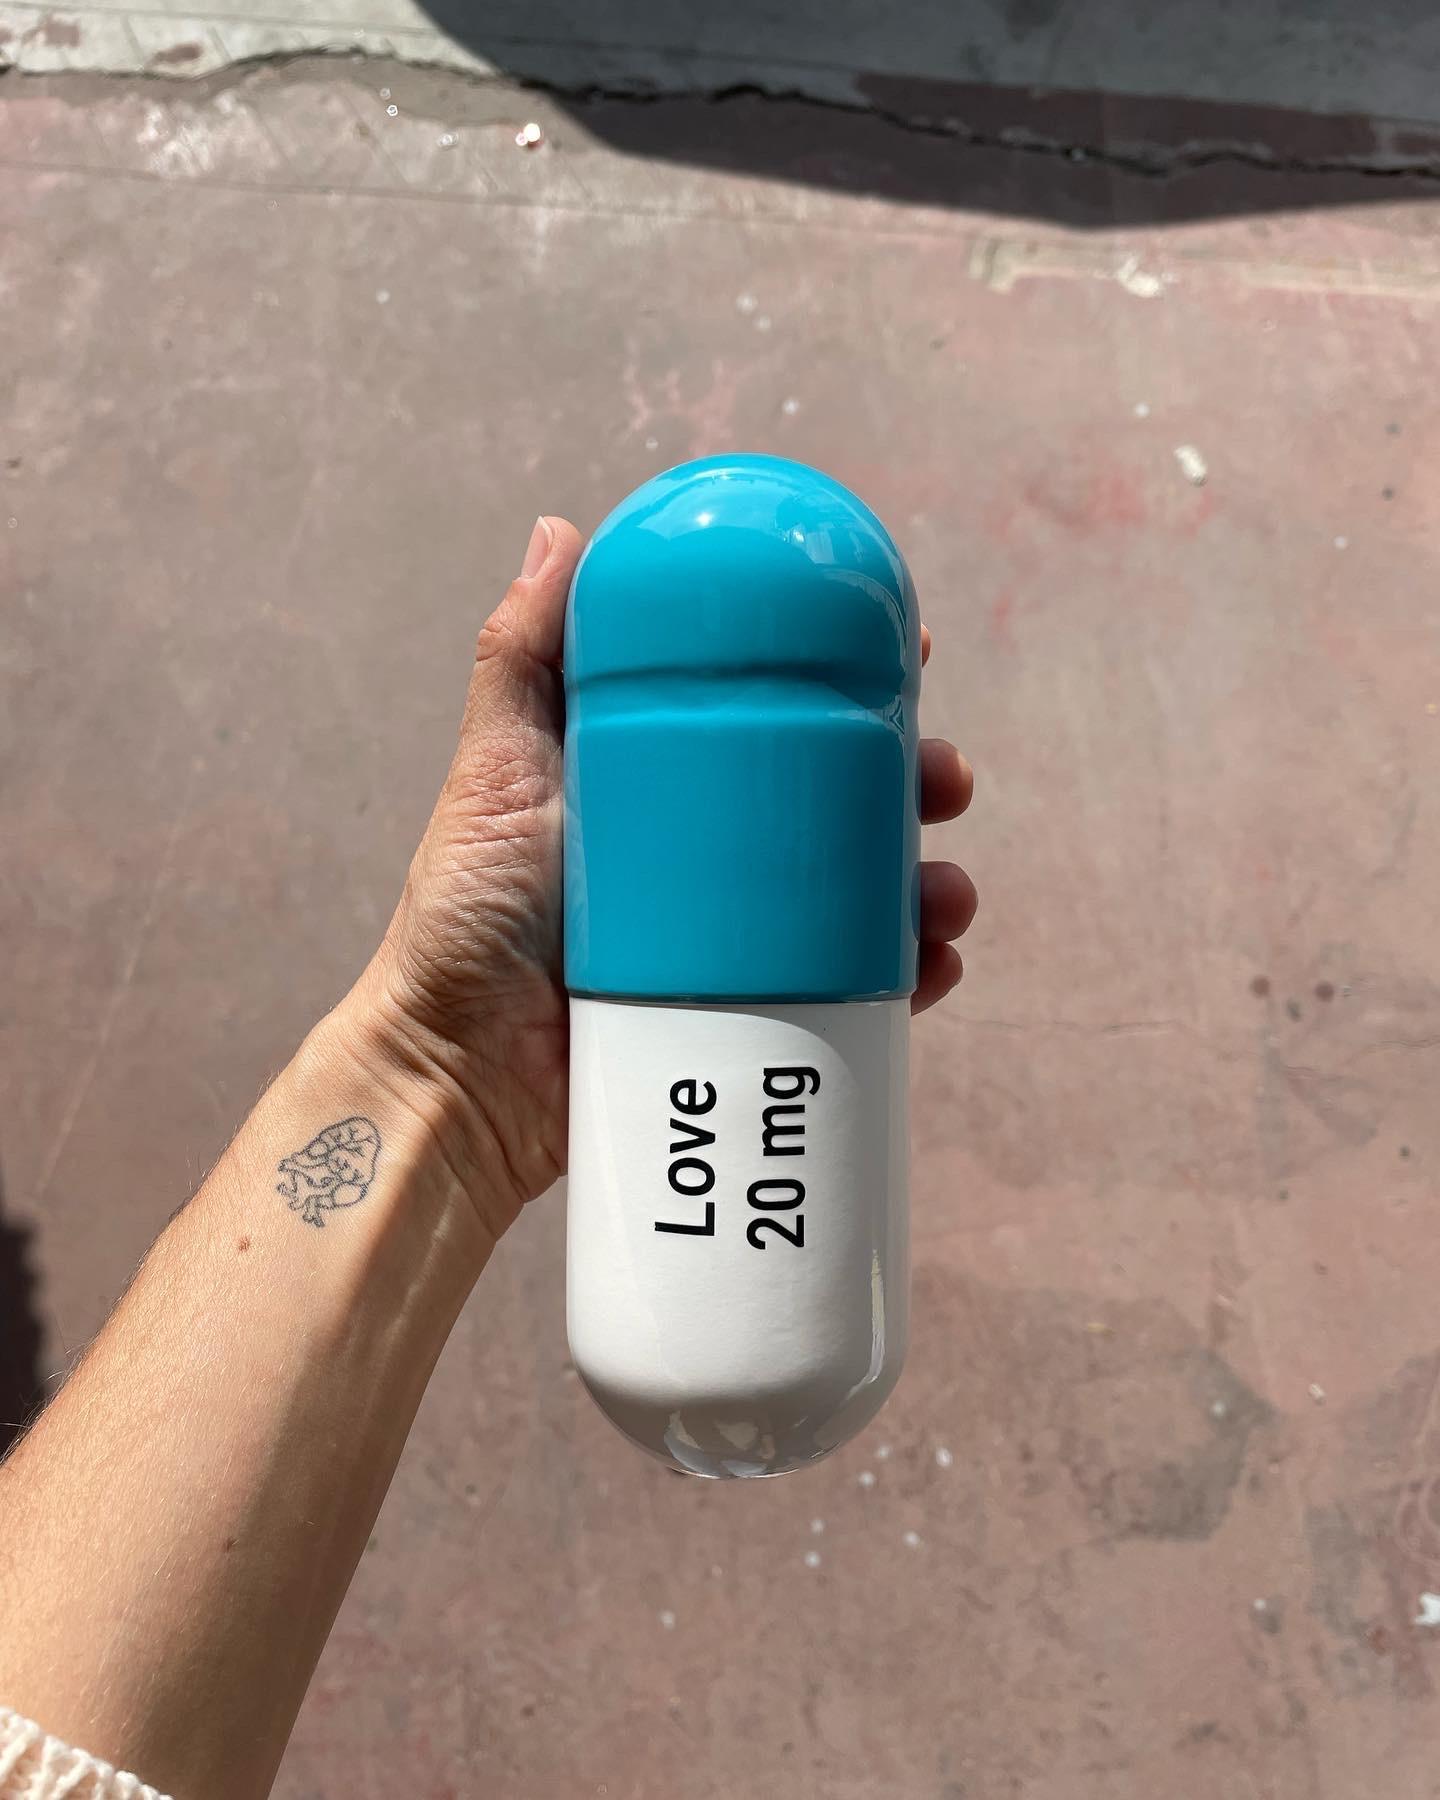 20 mg Love pill (turquoise and white) - figurative pop sculpture - Sculpture by Tal Nehoray